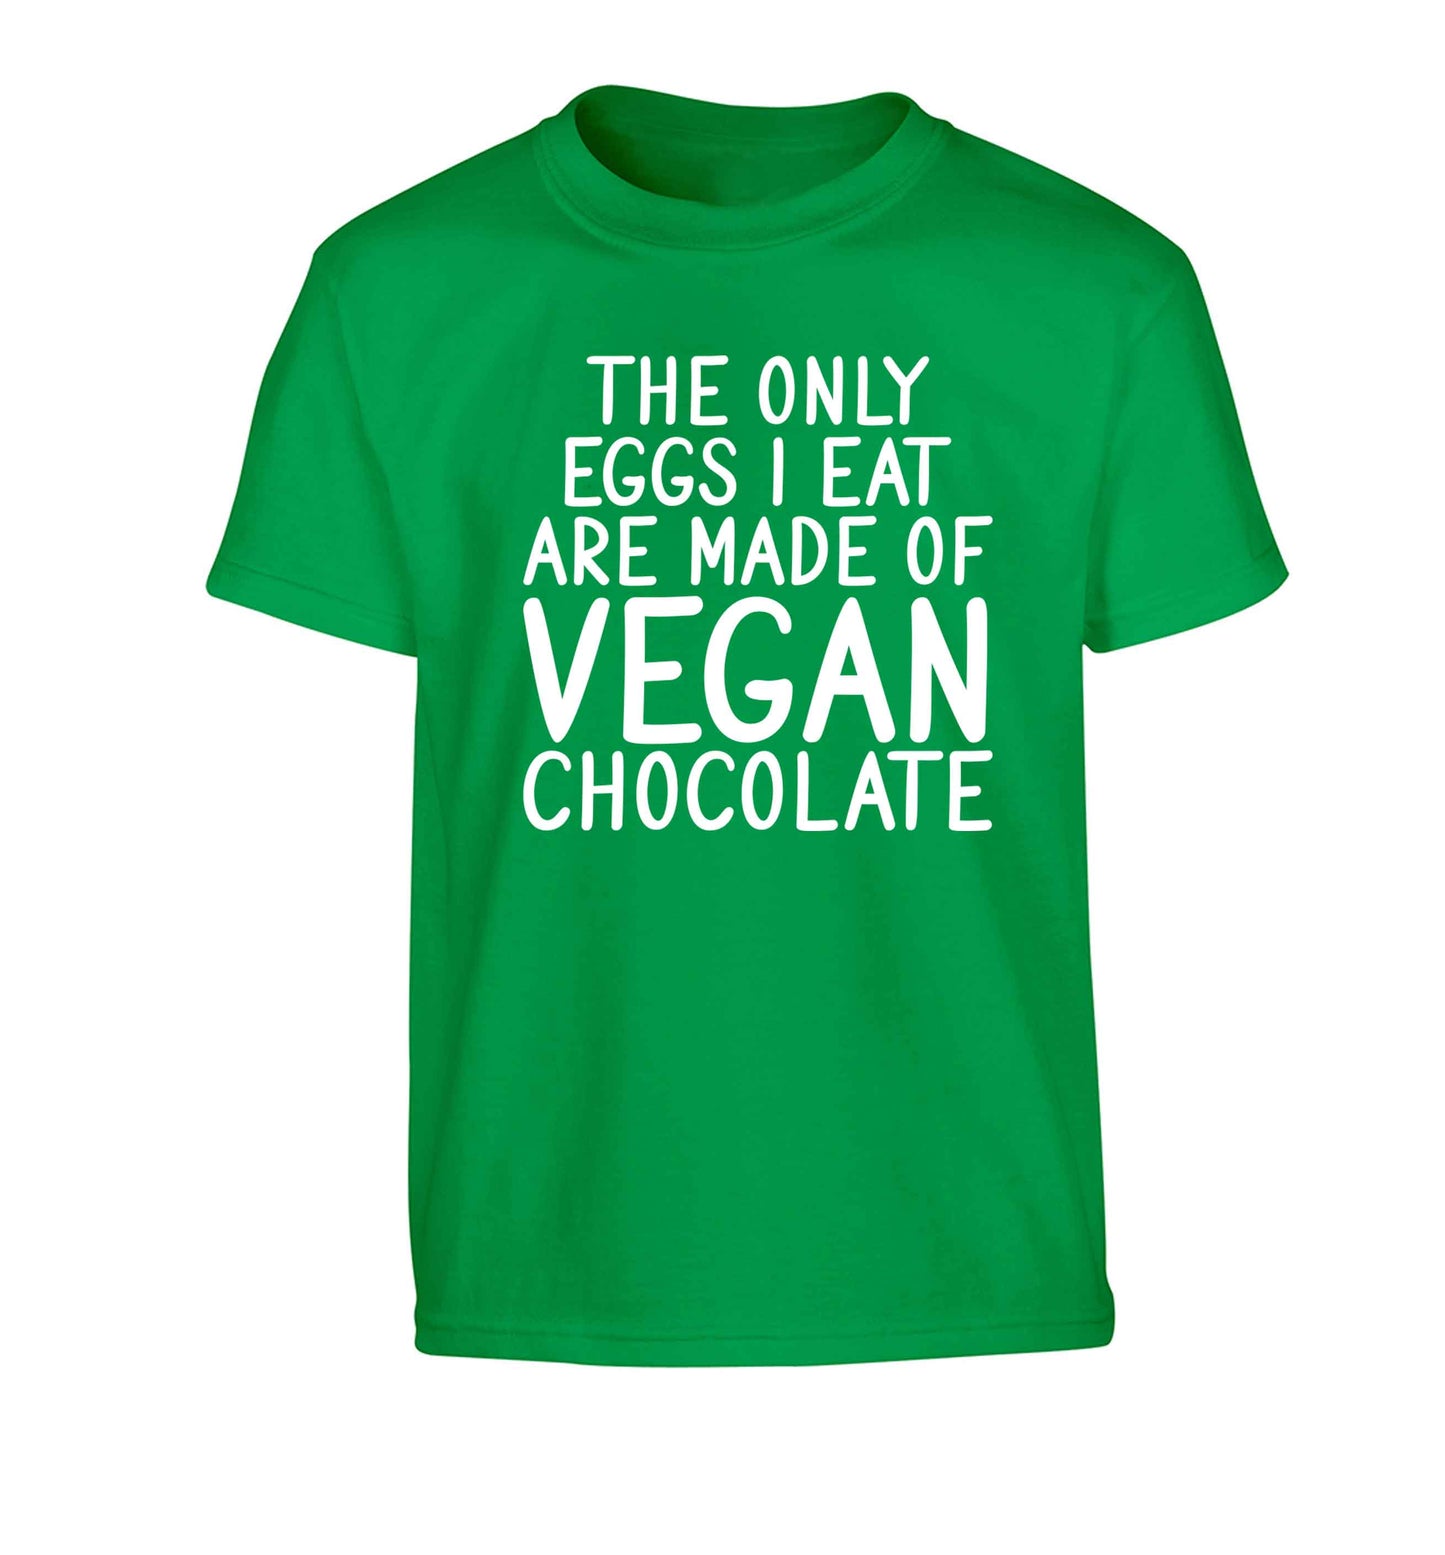 The only eggs I eat are made of vegan chocolate Children's green Tshirt 12-13 Years